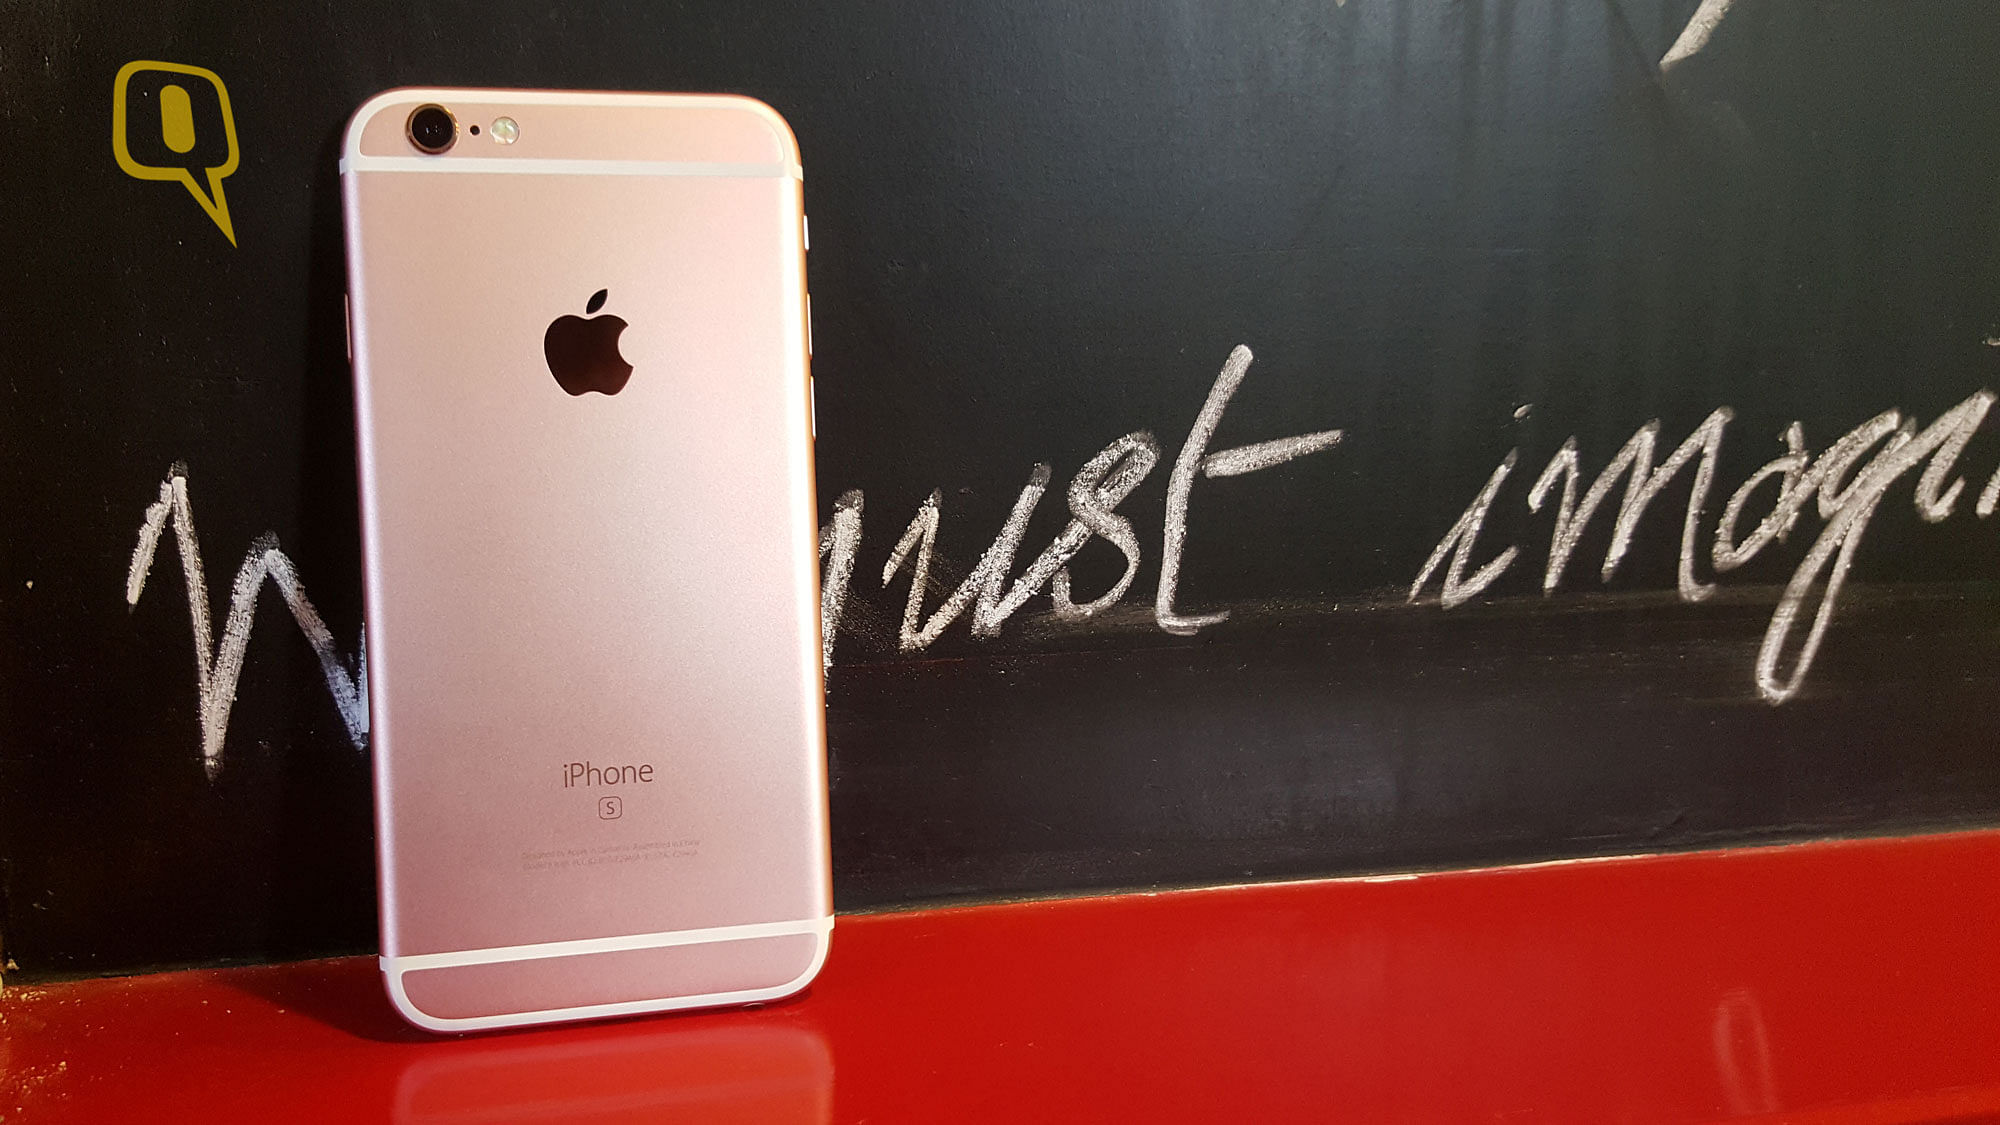 The rose gold Apple iPhone 6s 64 GB. (Photo: The Quint)